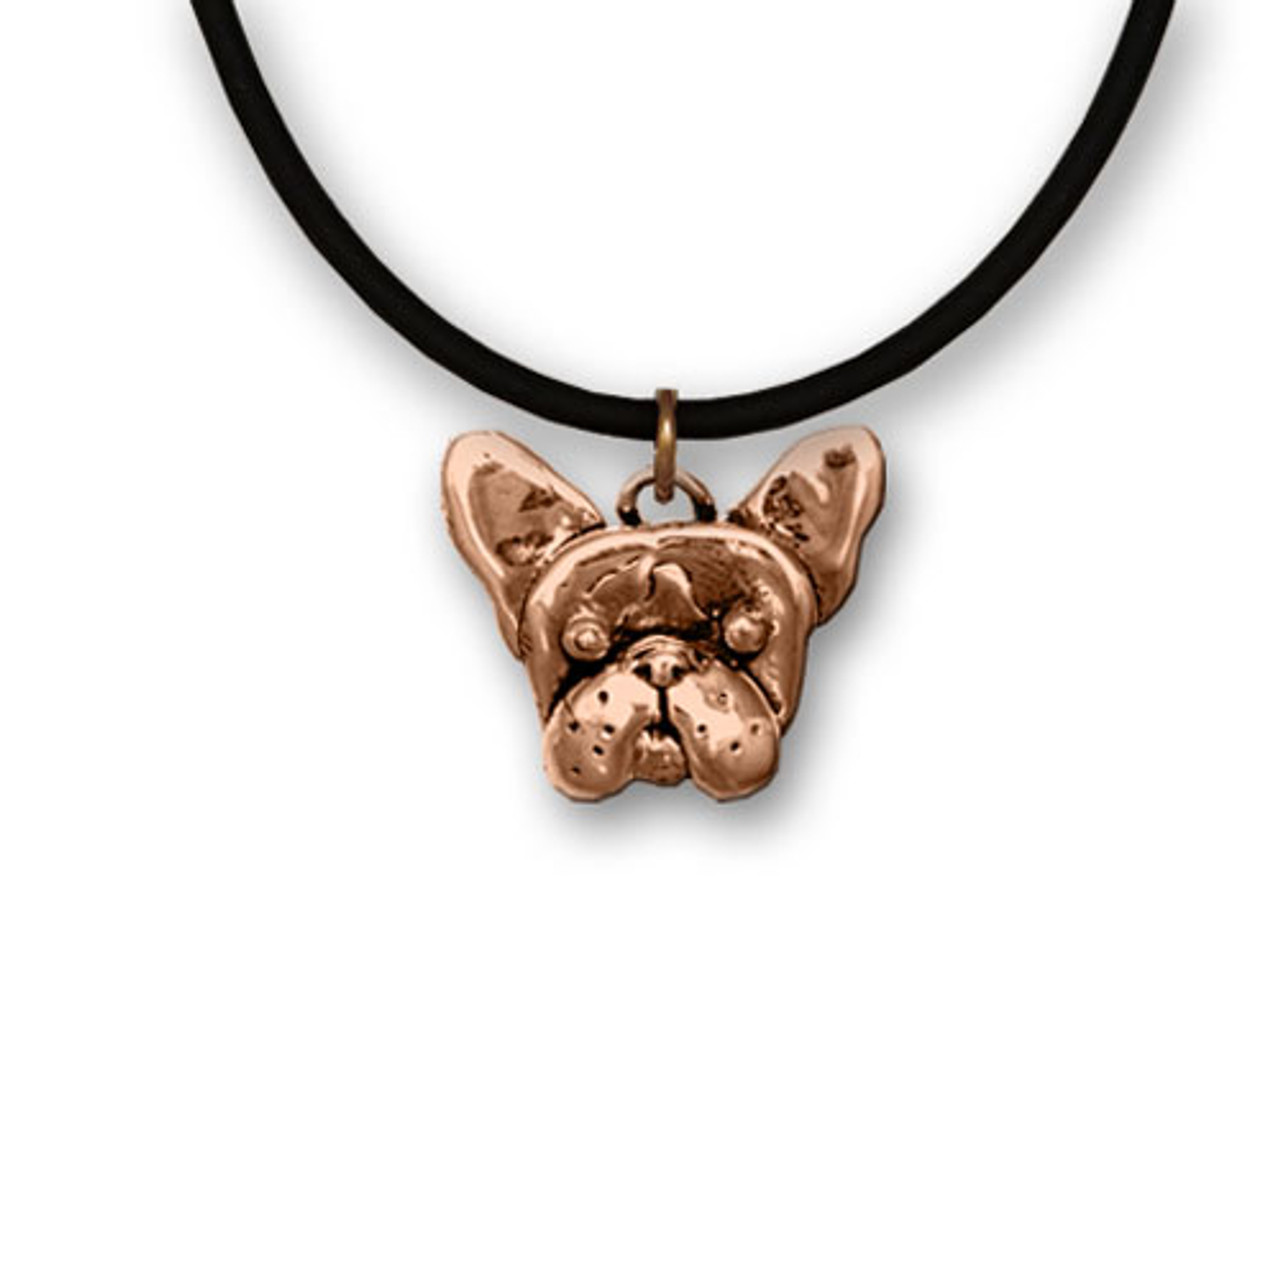 Buy Sterling Silver French Bulldog Necklace Online in India - Etsy